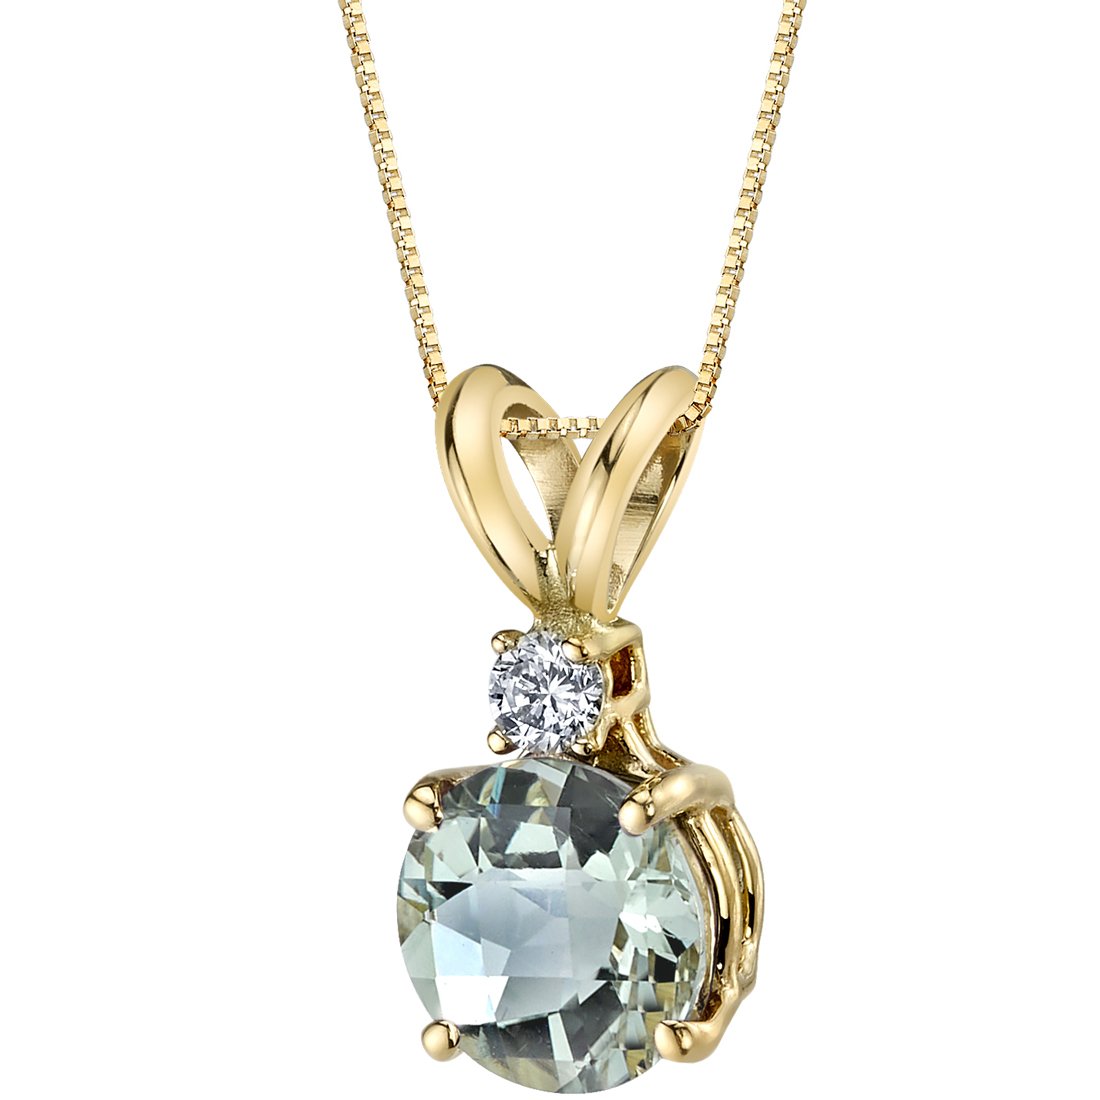 PEORA Green Amethyst with Genuine Diamond Pendant in 14K Yellow Gold, Elegant Solitaire, Round Shape, 6.50mm, 1 Carat total